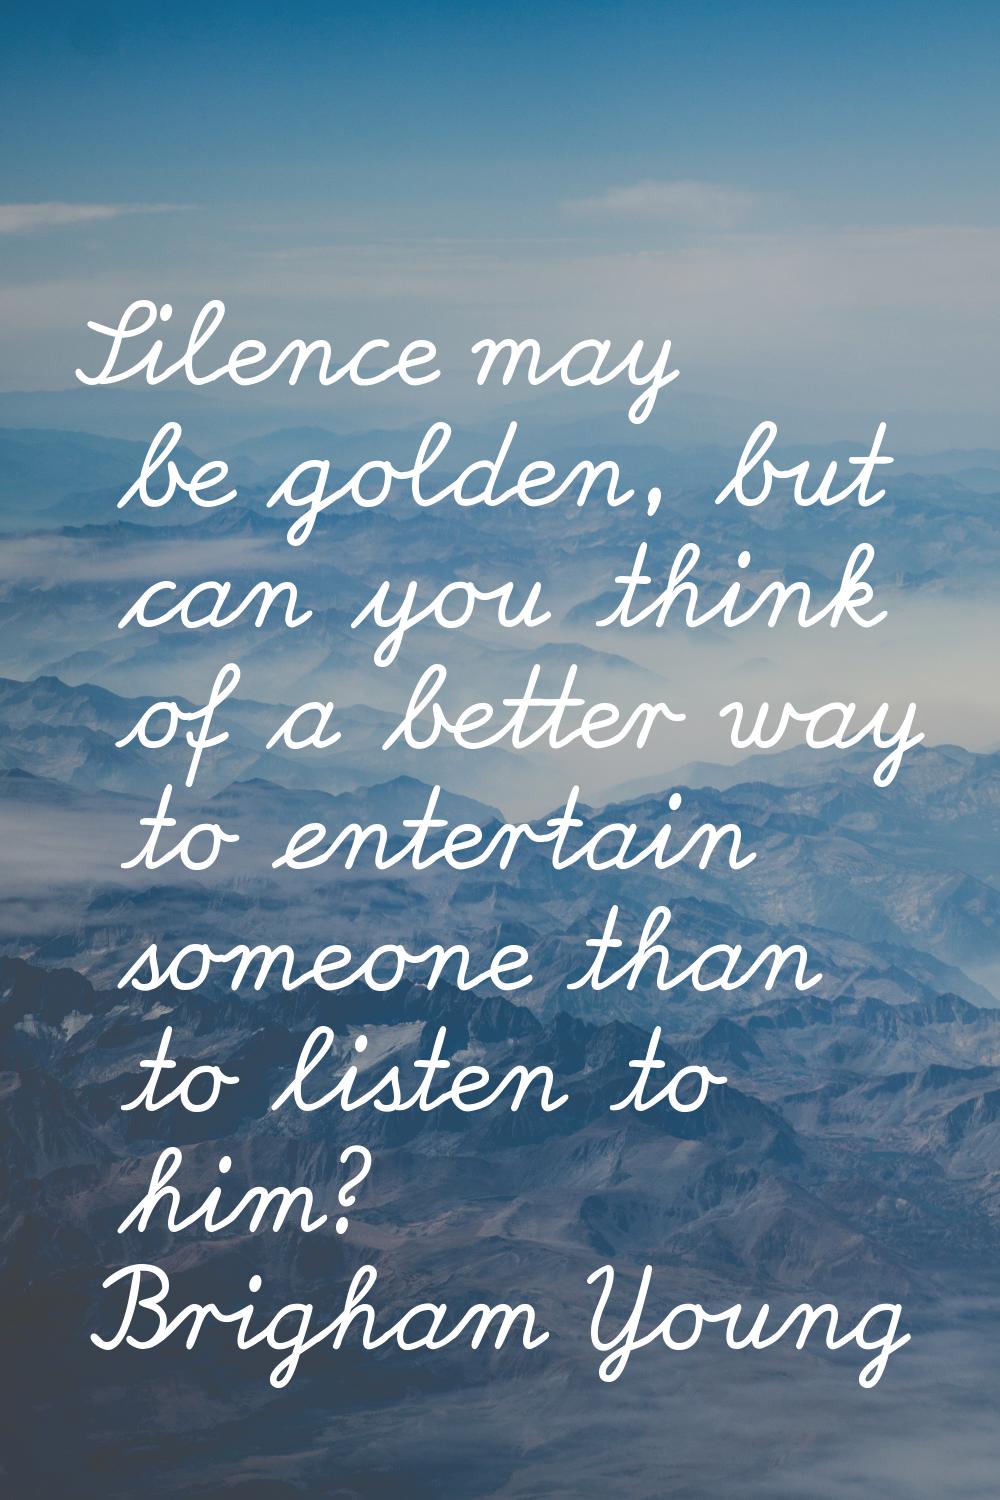 Silence may be golden, but can you think of a better way to entertain someone than to listen to him